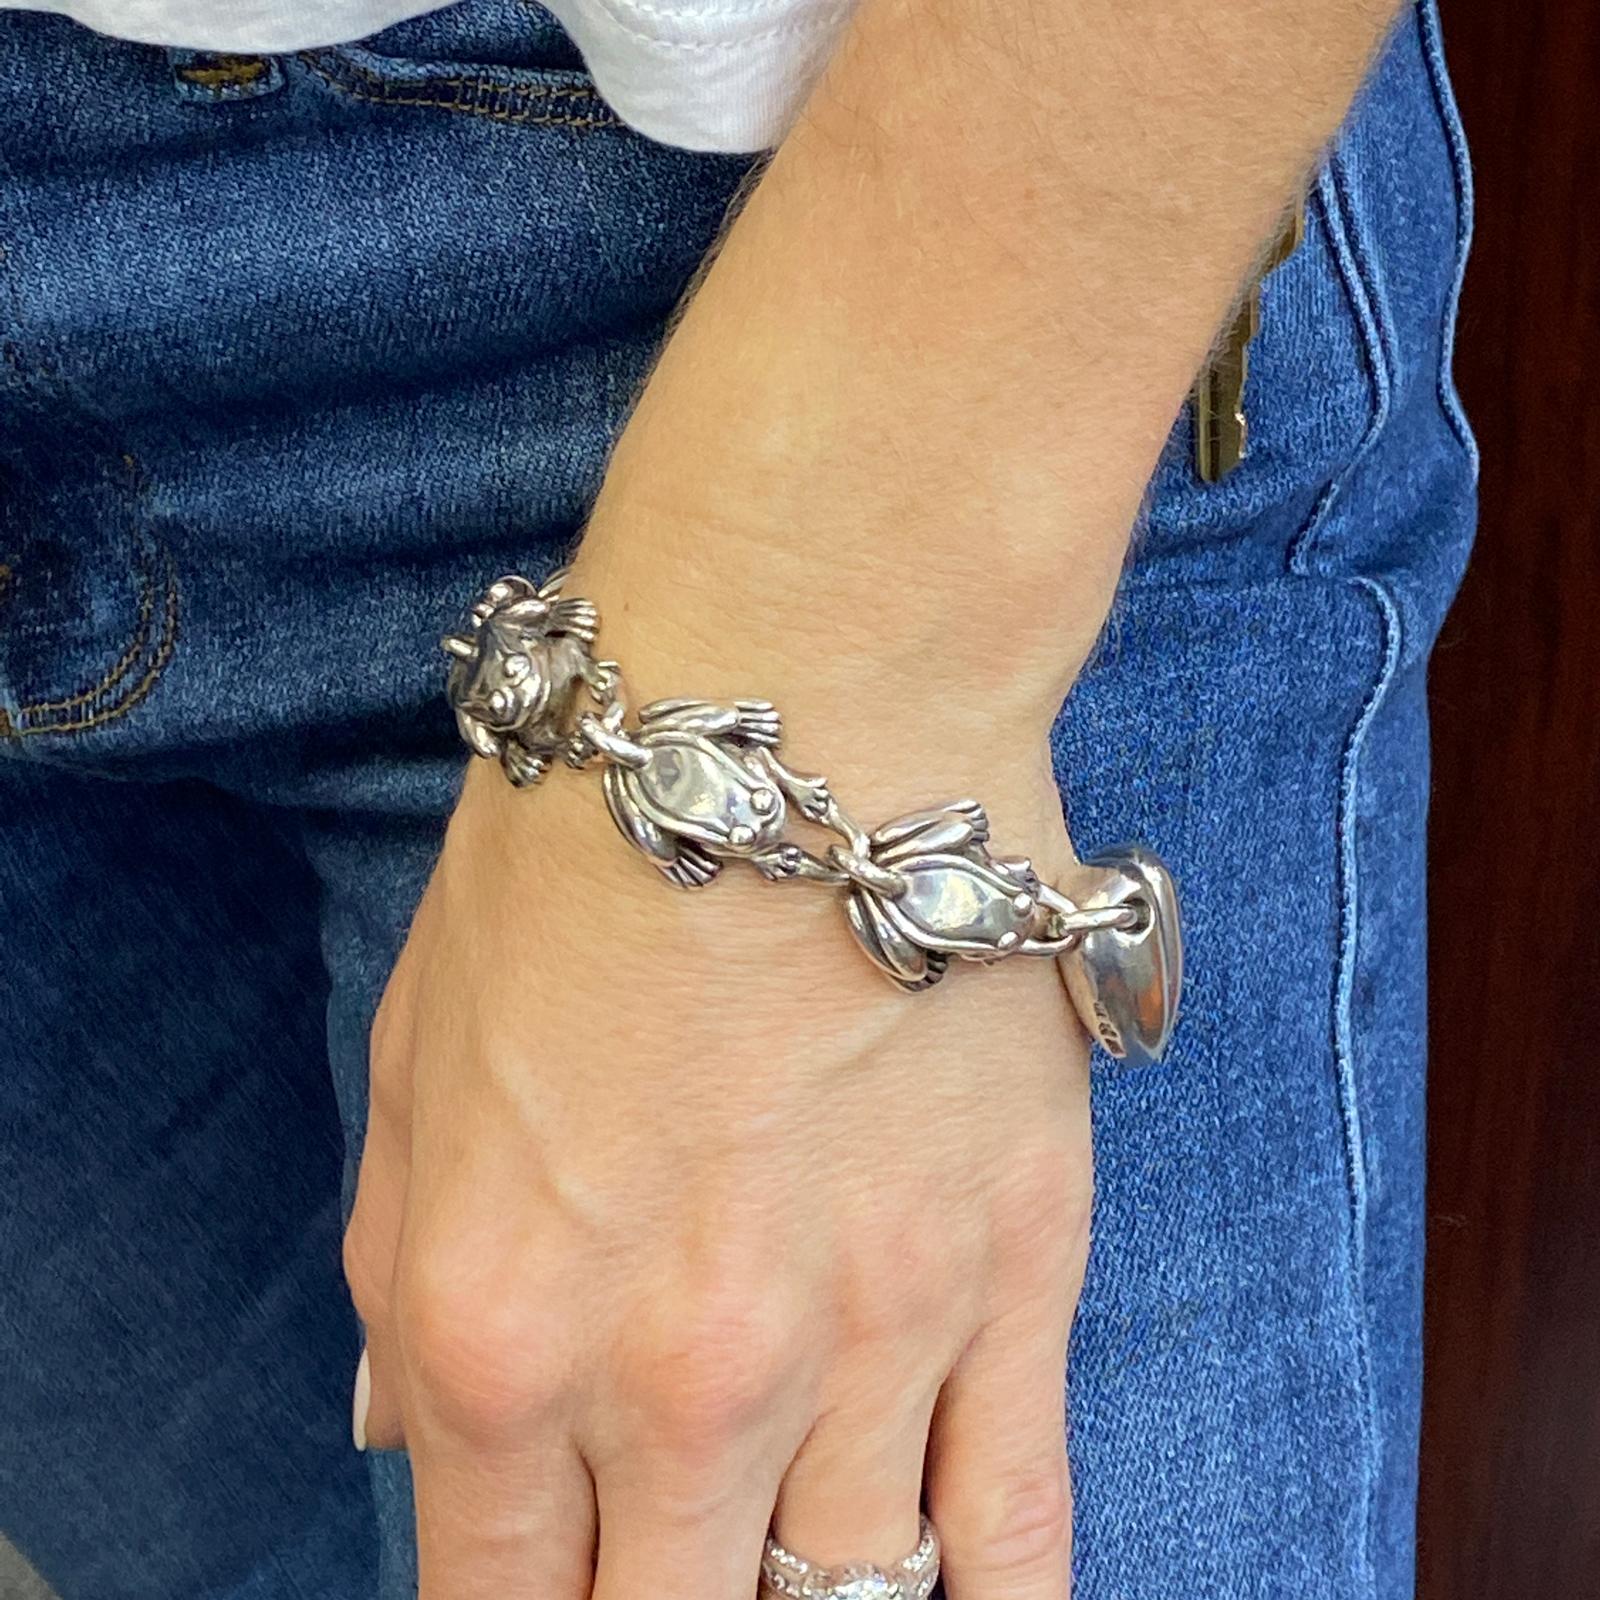 Vintage Kieselstein-Cord frog and heart link bracelet fashioned in sterling silver. Each frog link is signed, and the bracelet measures 8.0 inches in length and 1 inch in width (at the widest part). Signed 1997 925 Kieselstein-Cord. 